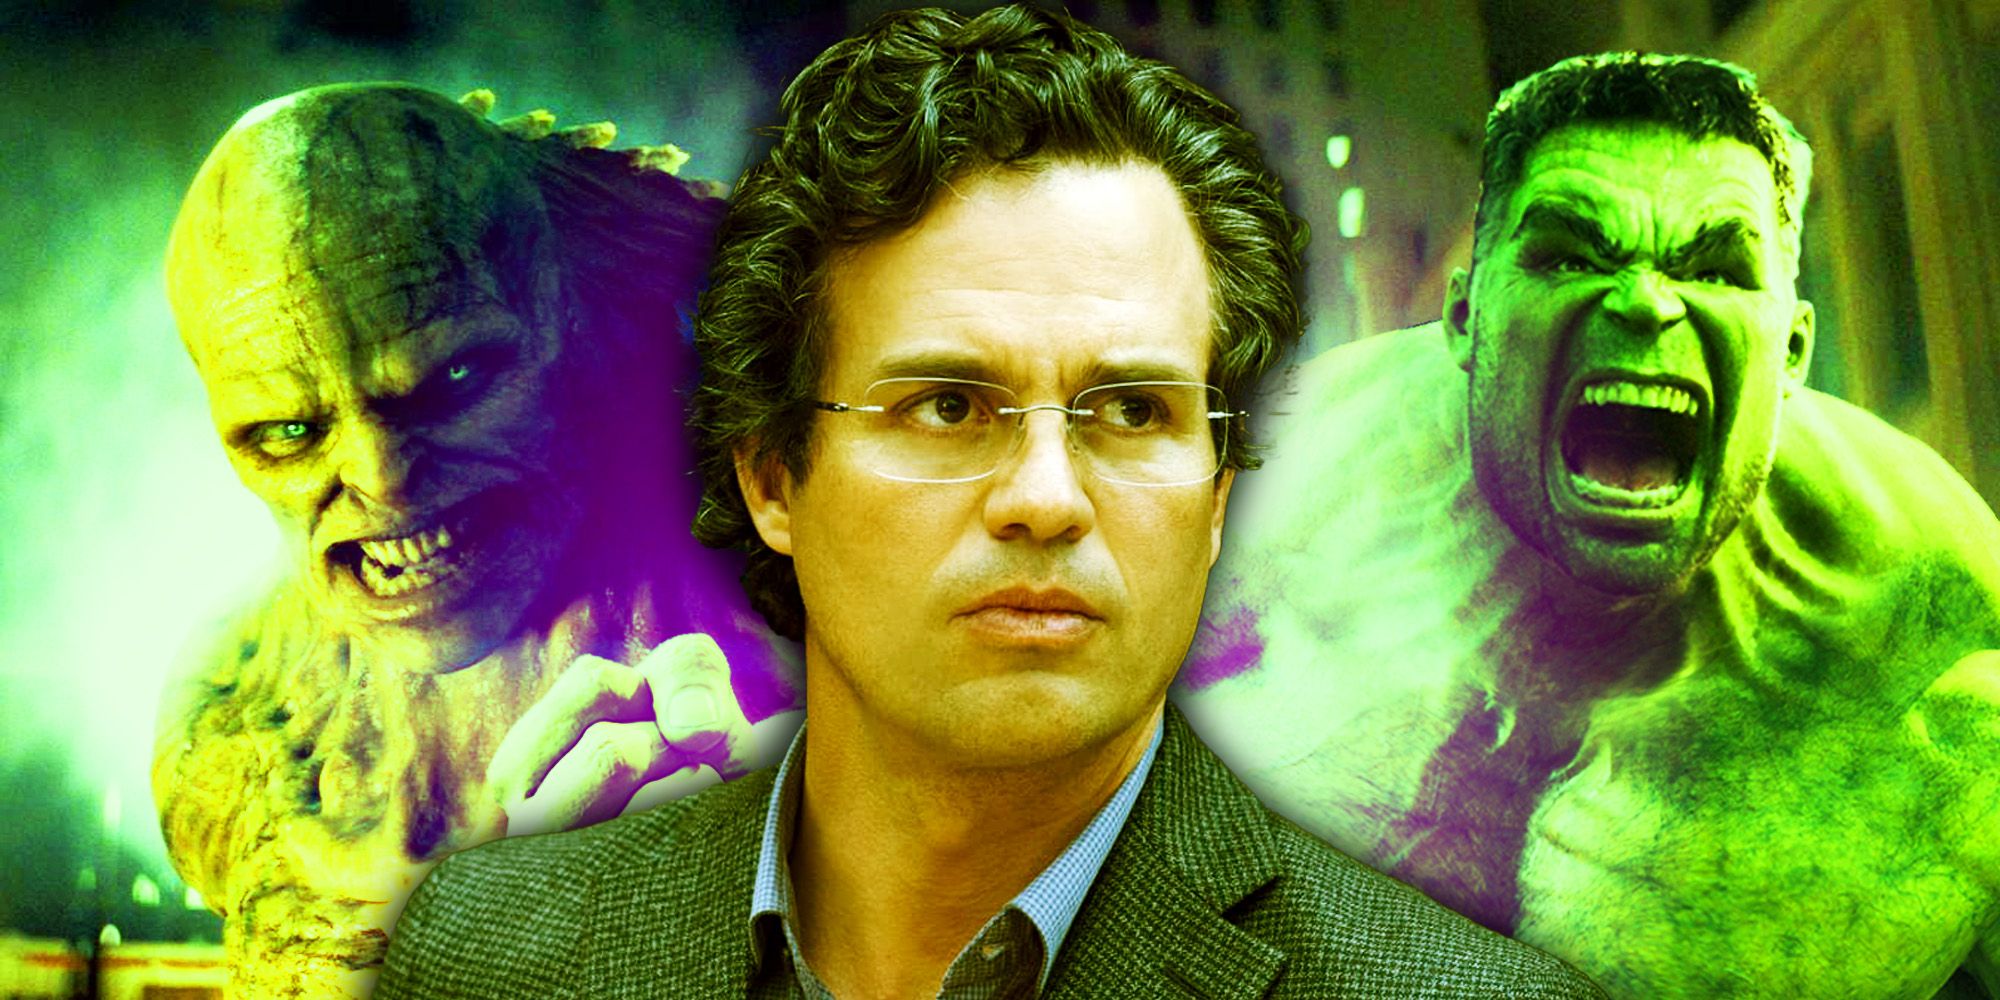 Abomination, Bruce Banner, and The Hulk in the MCU.